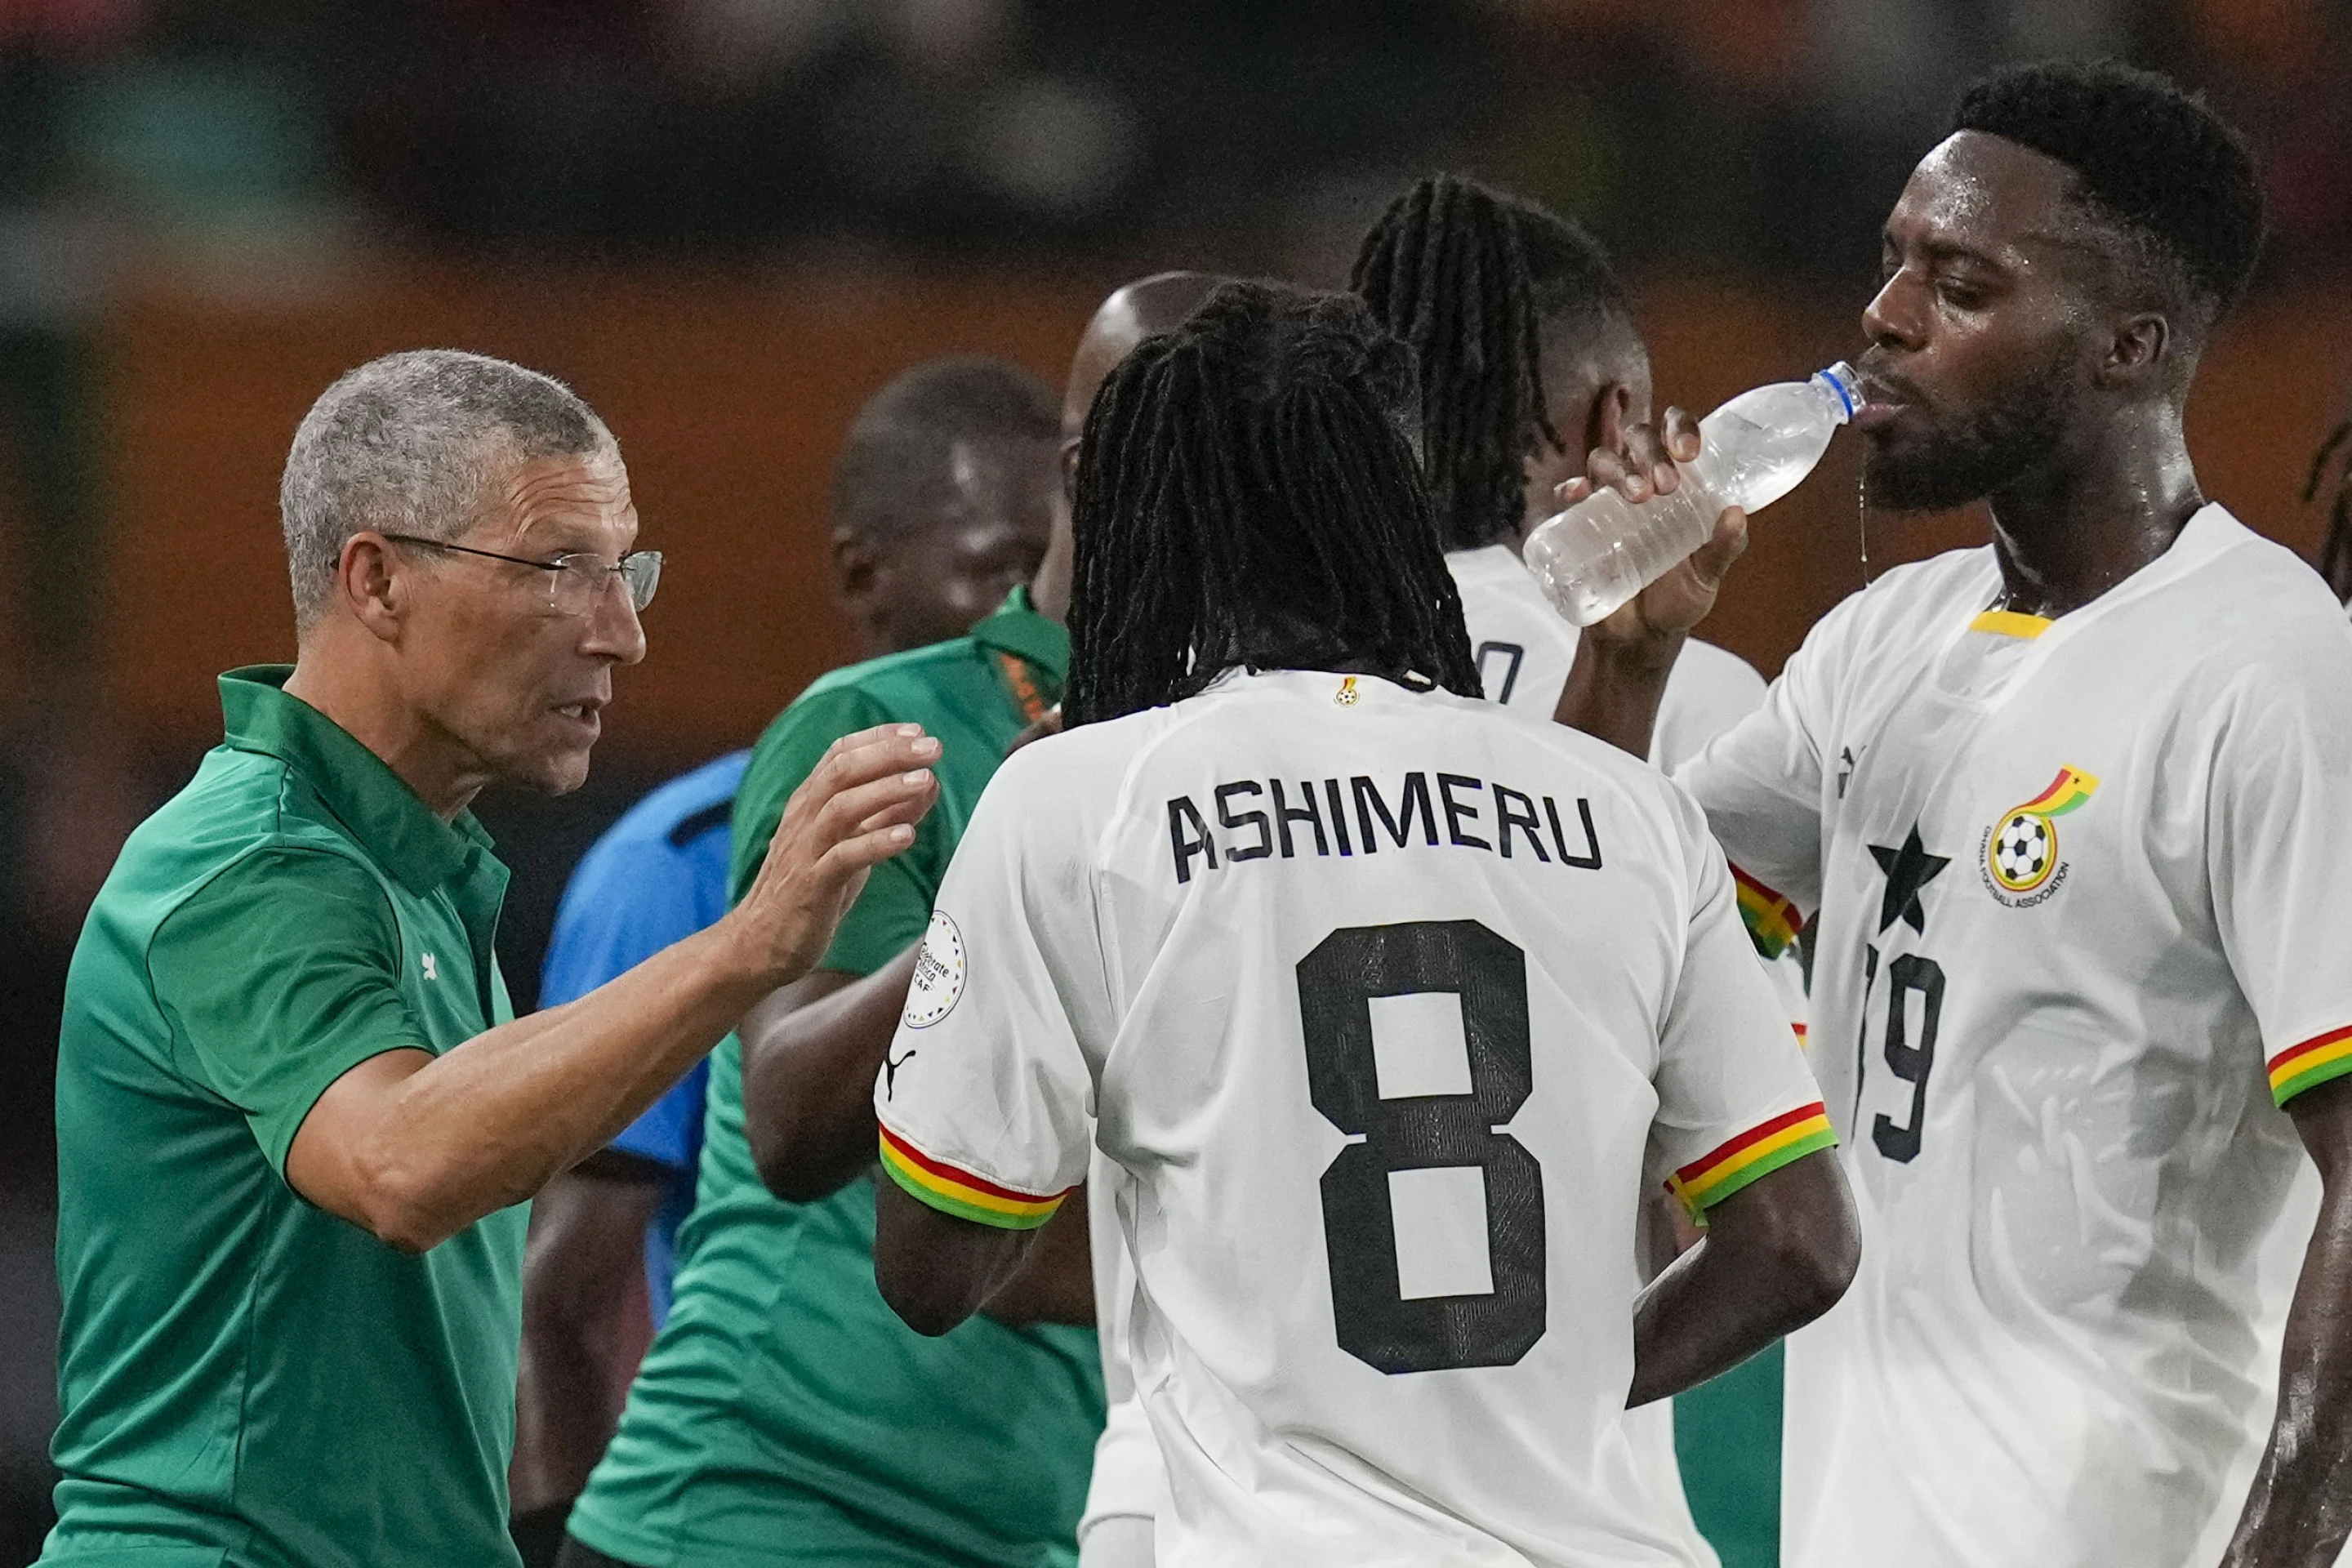 Chris Hughton (L), manager of Ghana, talks to his players during the game against Egypt at the Africa Cup of Nations at the Felix Houphouet-Boigny Stadium in Abidjan, Cote d'Ivoire, January 18, 2024. /AP